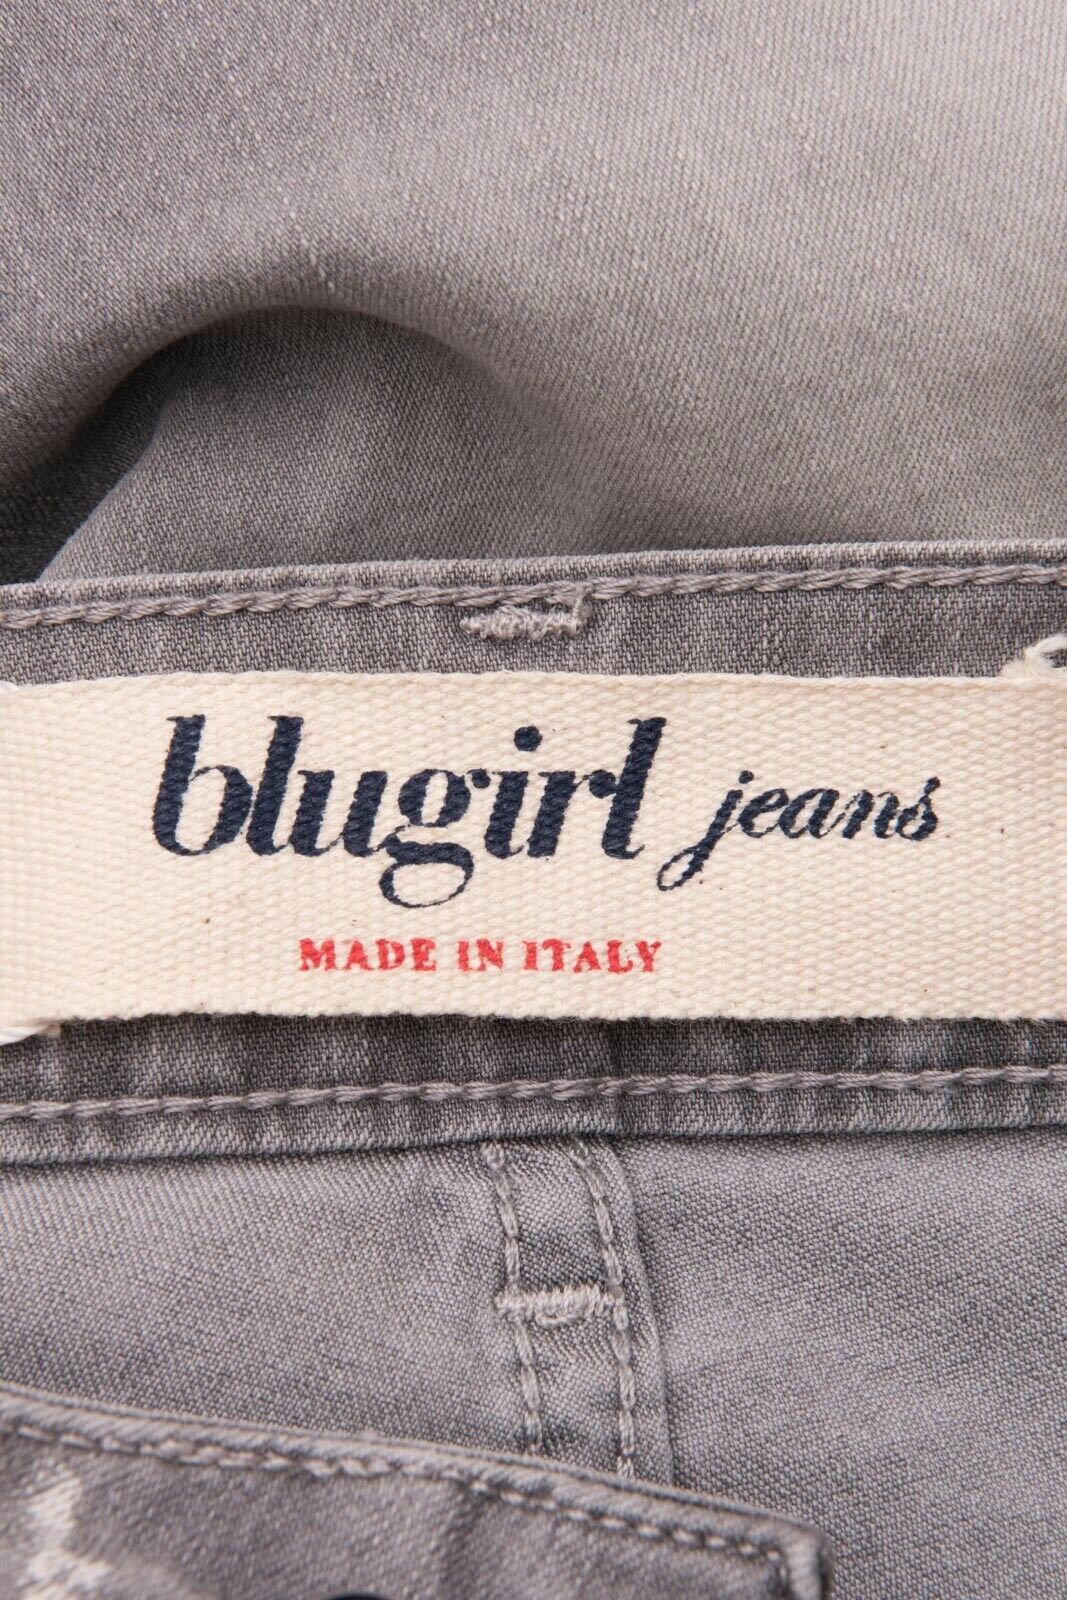 BLUGIRL JEANS Stretch Jeans Size XS Faded Effect Made in Italy